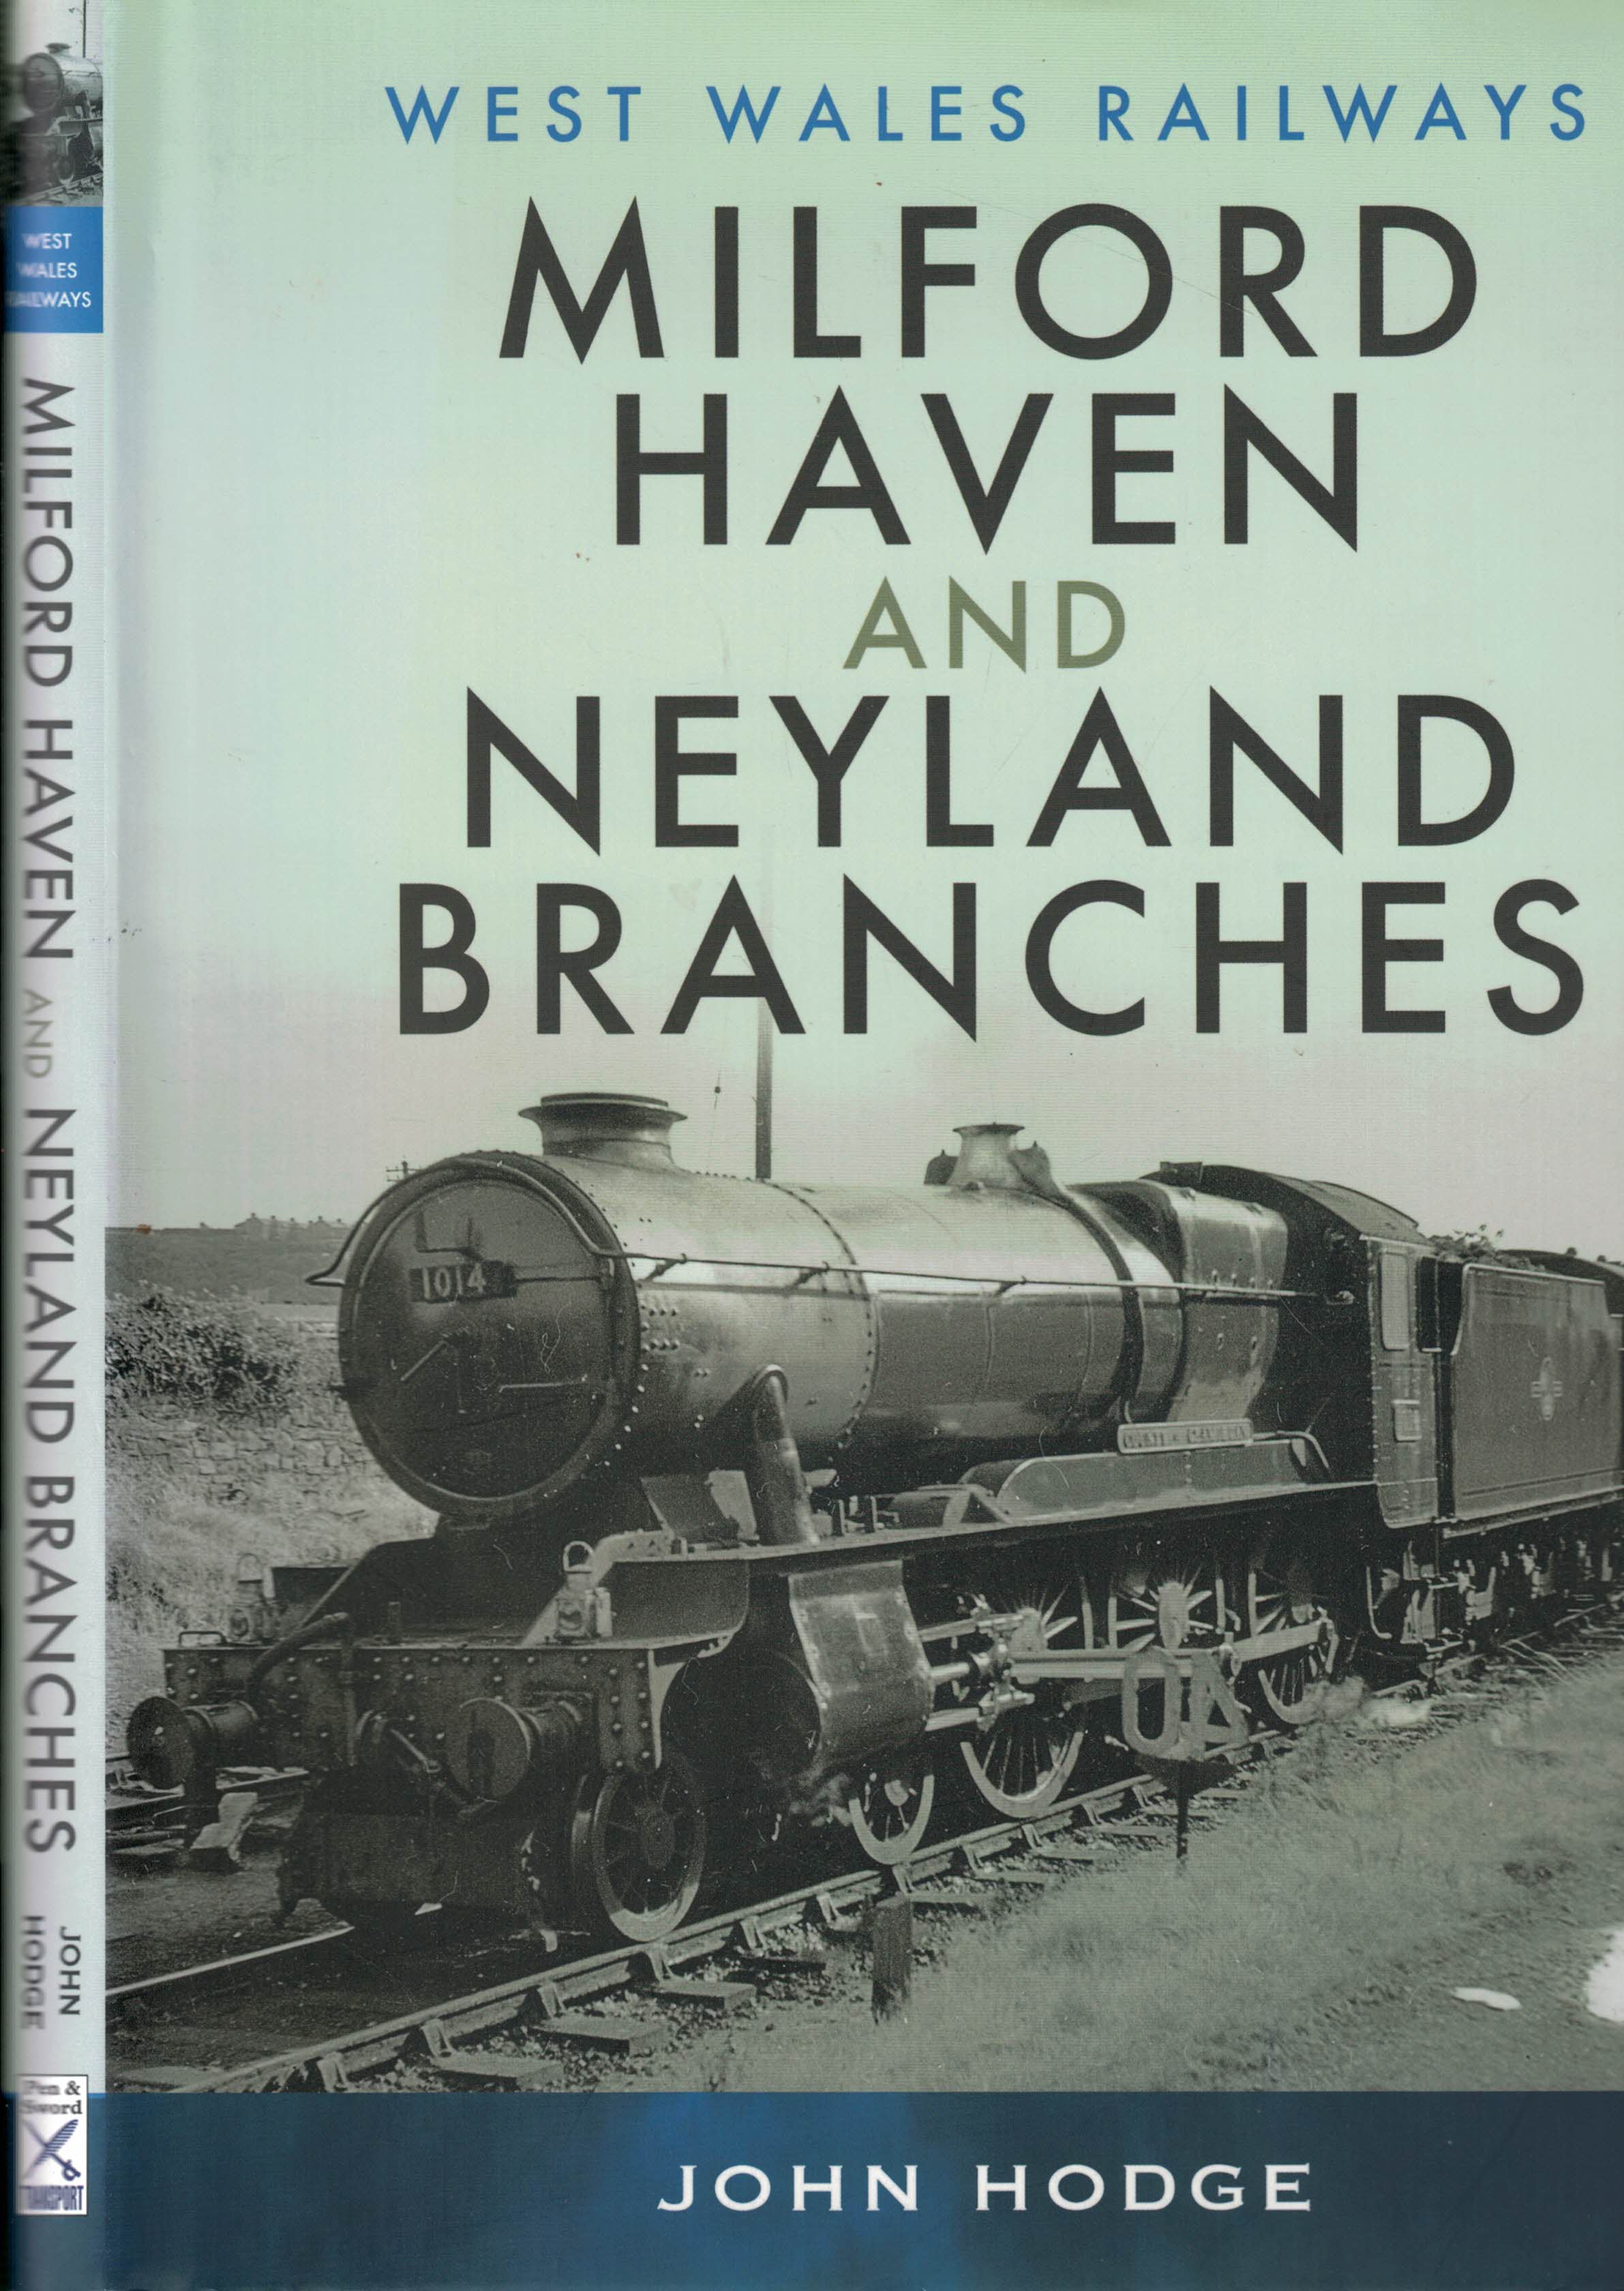 Milford Haven and Neyland Branches. West Wales Railways.